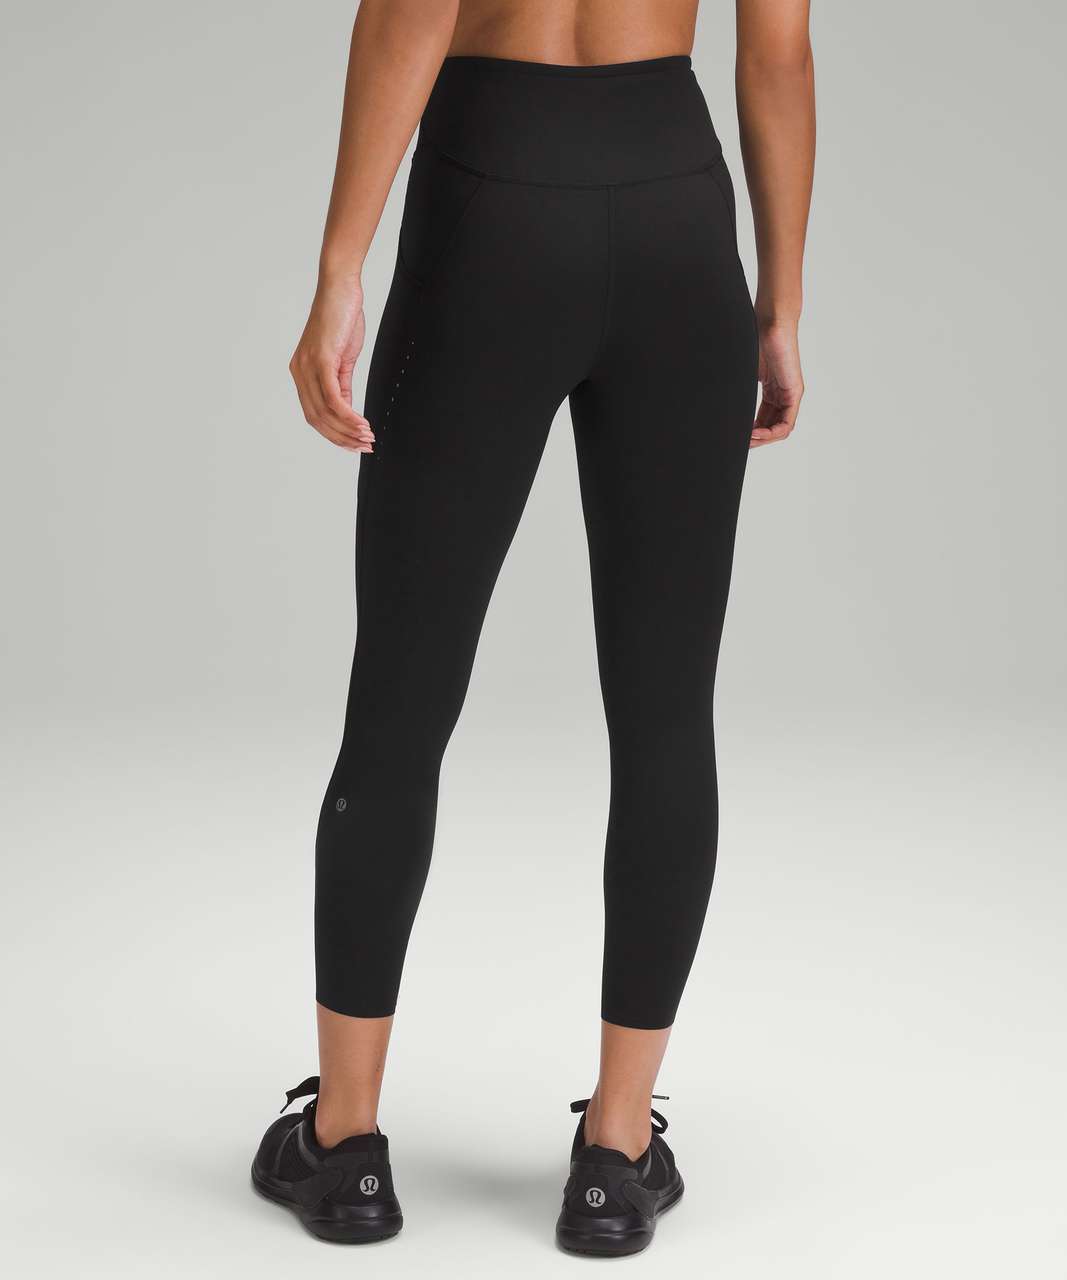 Lululemon Fast and Free High-Rise Tight 25 *Pockets - Black